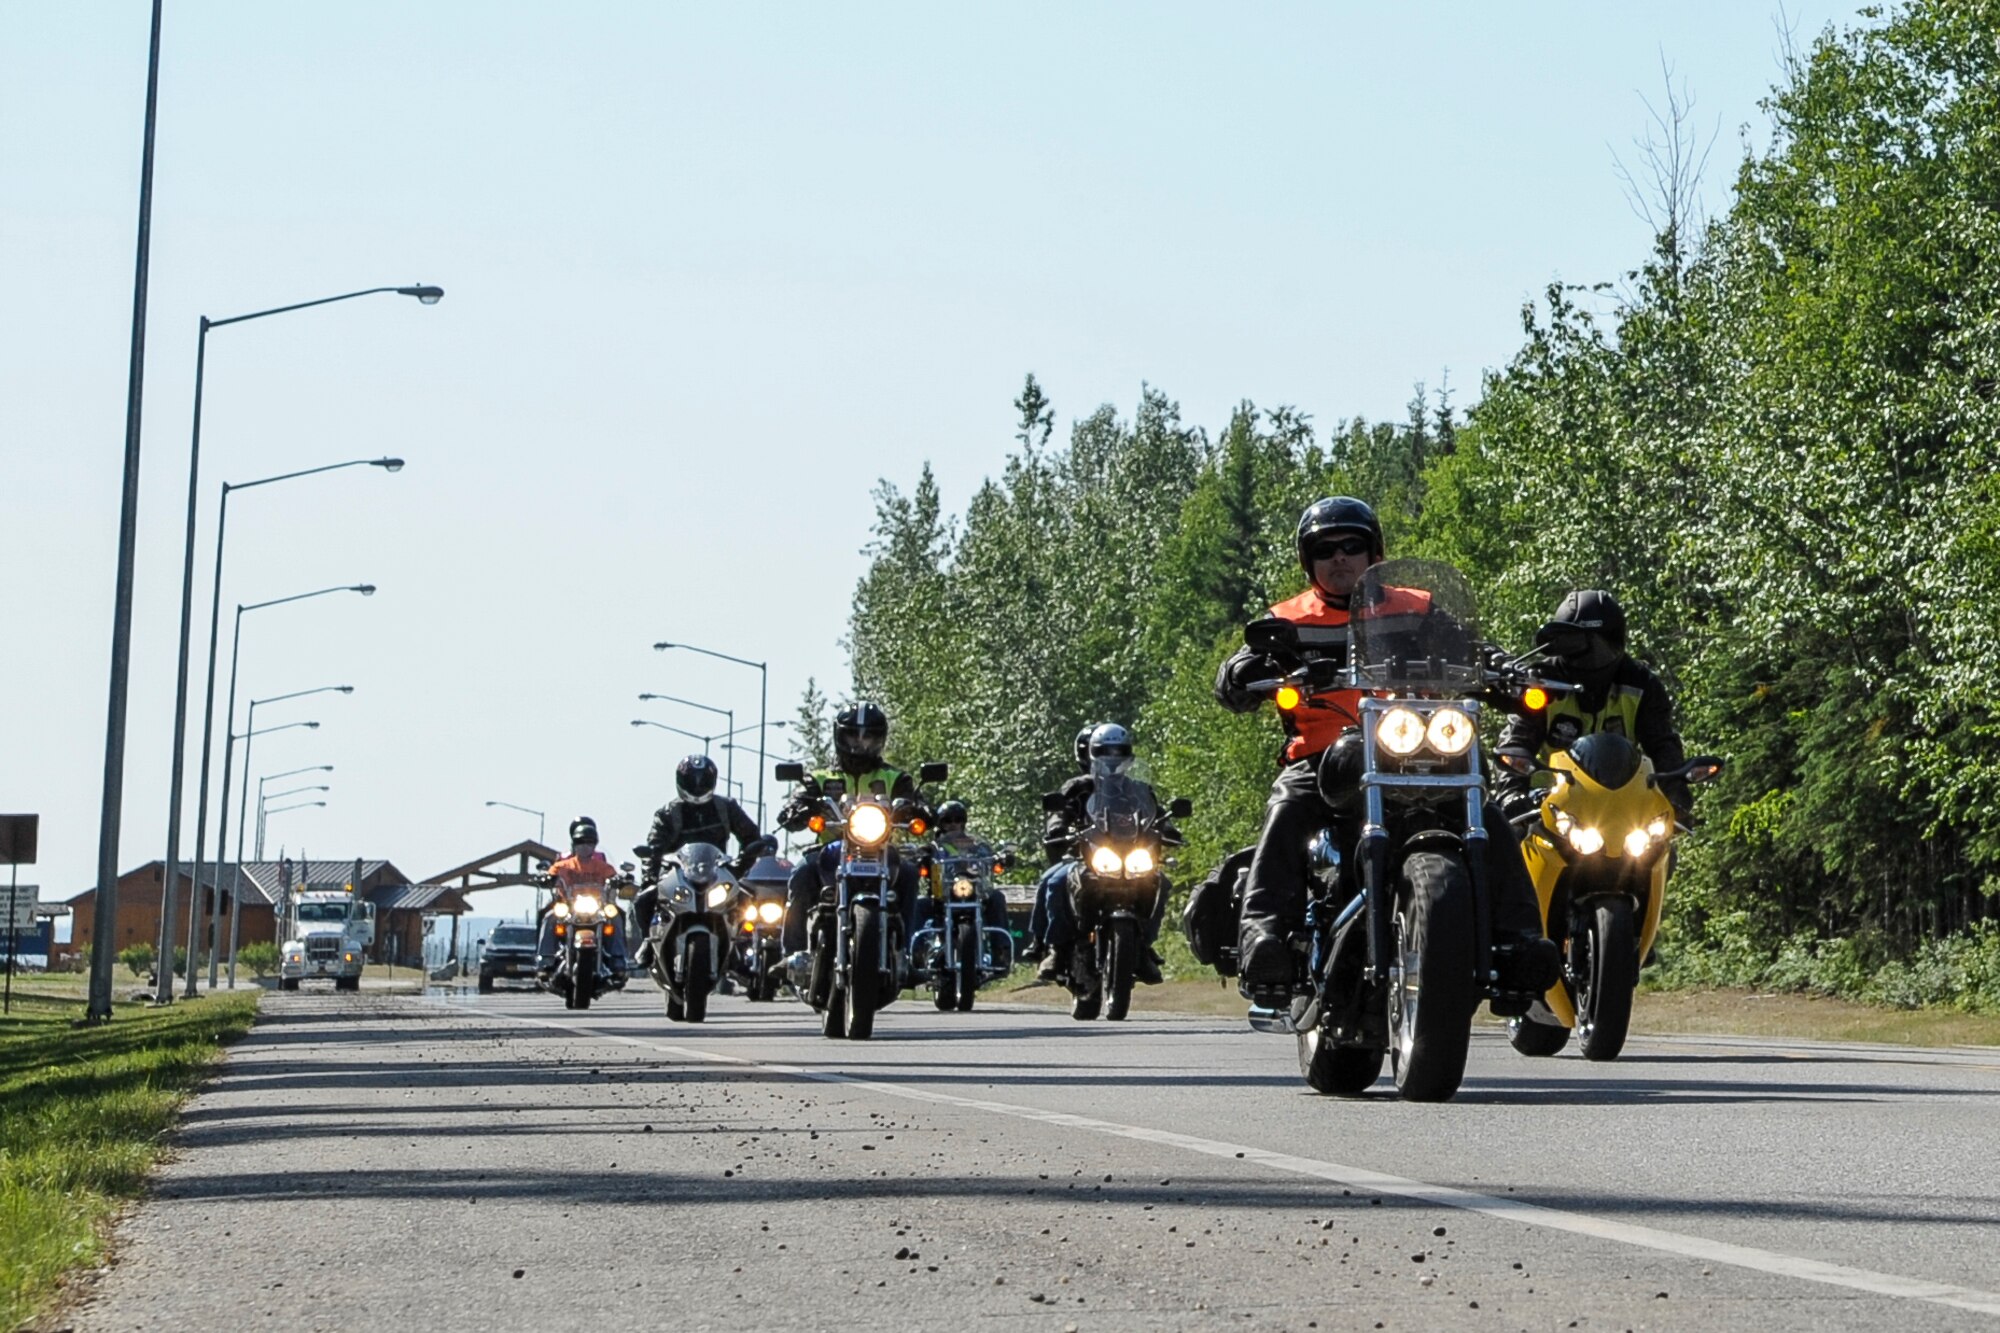 U.S. Air Force service members roll away from Hursey Gate during a motorcycle mentorship group ride June 22, 2013, Eielson Air Force Base, Alaska.  Mentorship rides are an opportunity for members of the Eielson community to not only practice motorcycle safety, but also to build camaraderie and meet other riders.  (U.S. Air Force photo by Airman 1st Class Peter Reft/Released)